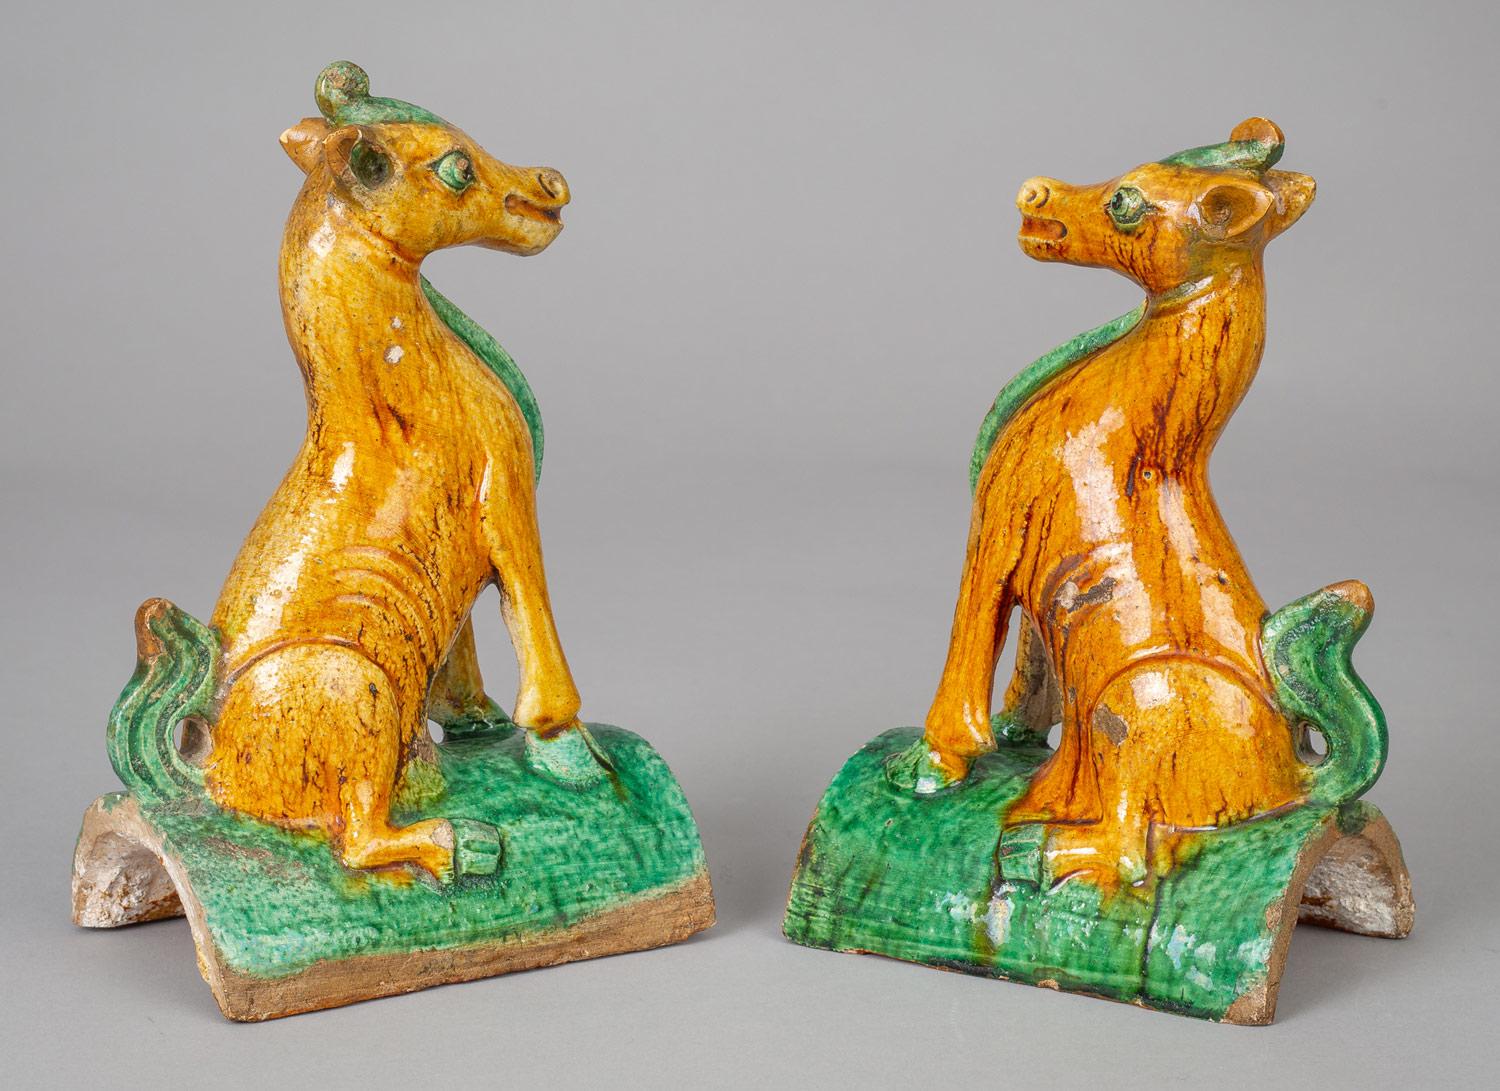 Charming pair of Chinese Qing dynasty Guangxu period pottery roof tiles in the form of horses sitting on their haunches with straight front legs, decorated in sancai colors of gold and green.